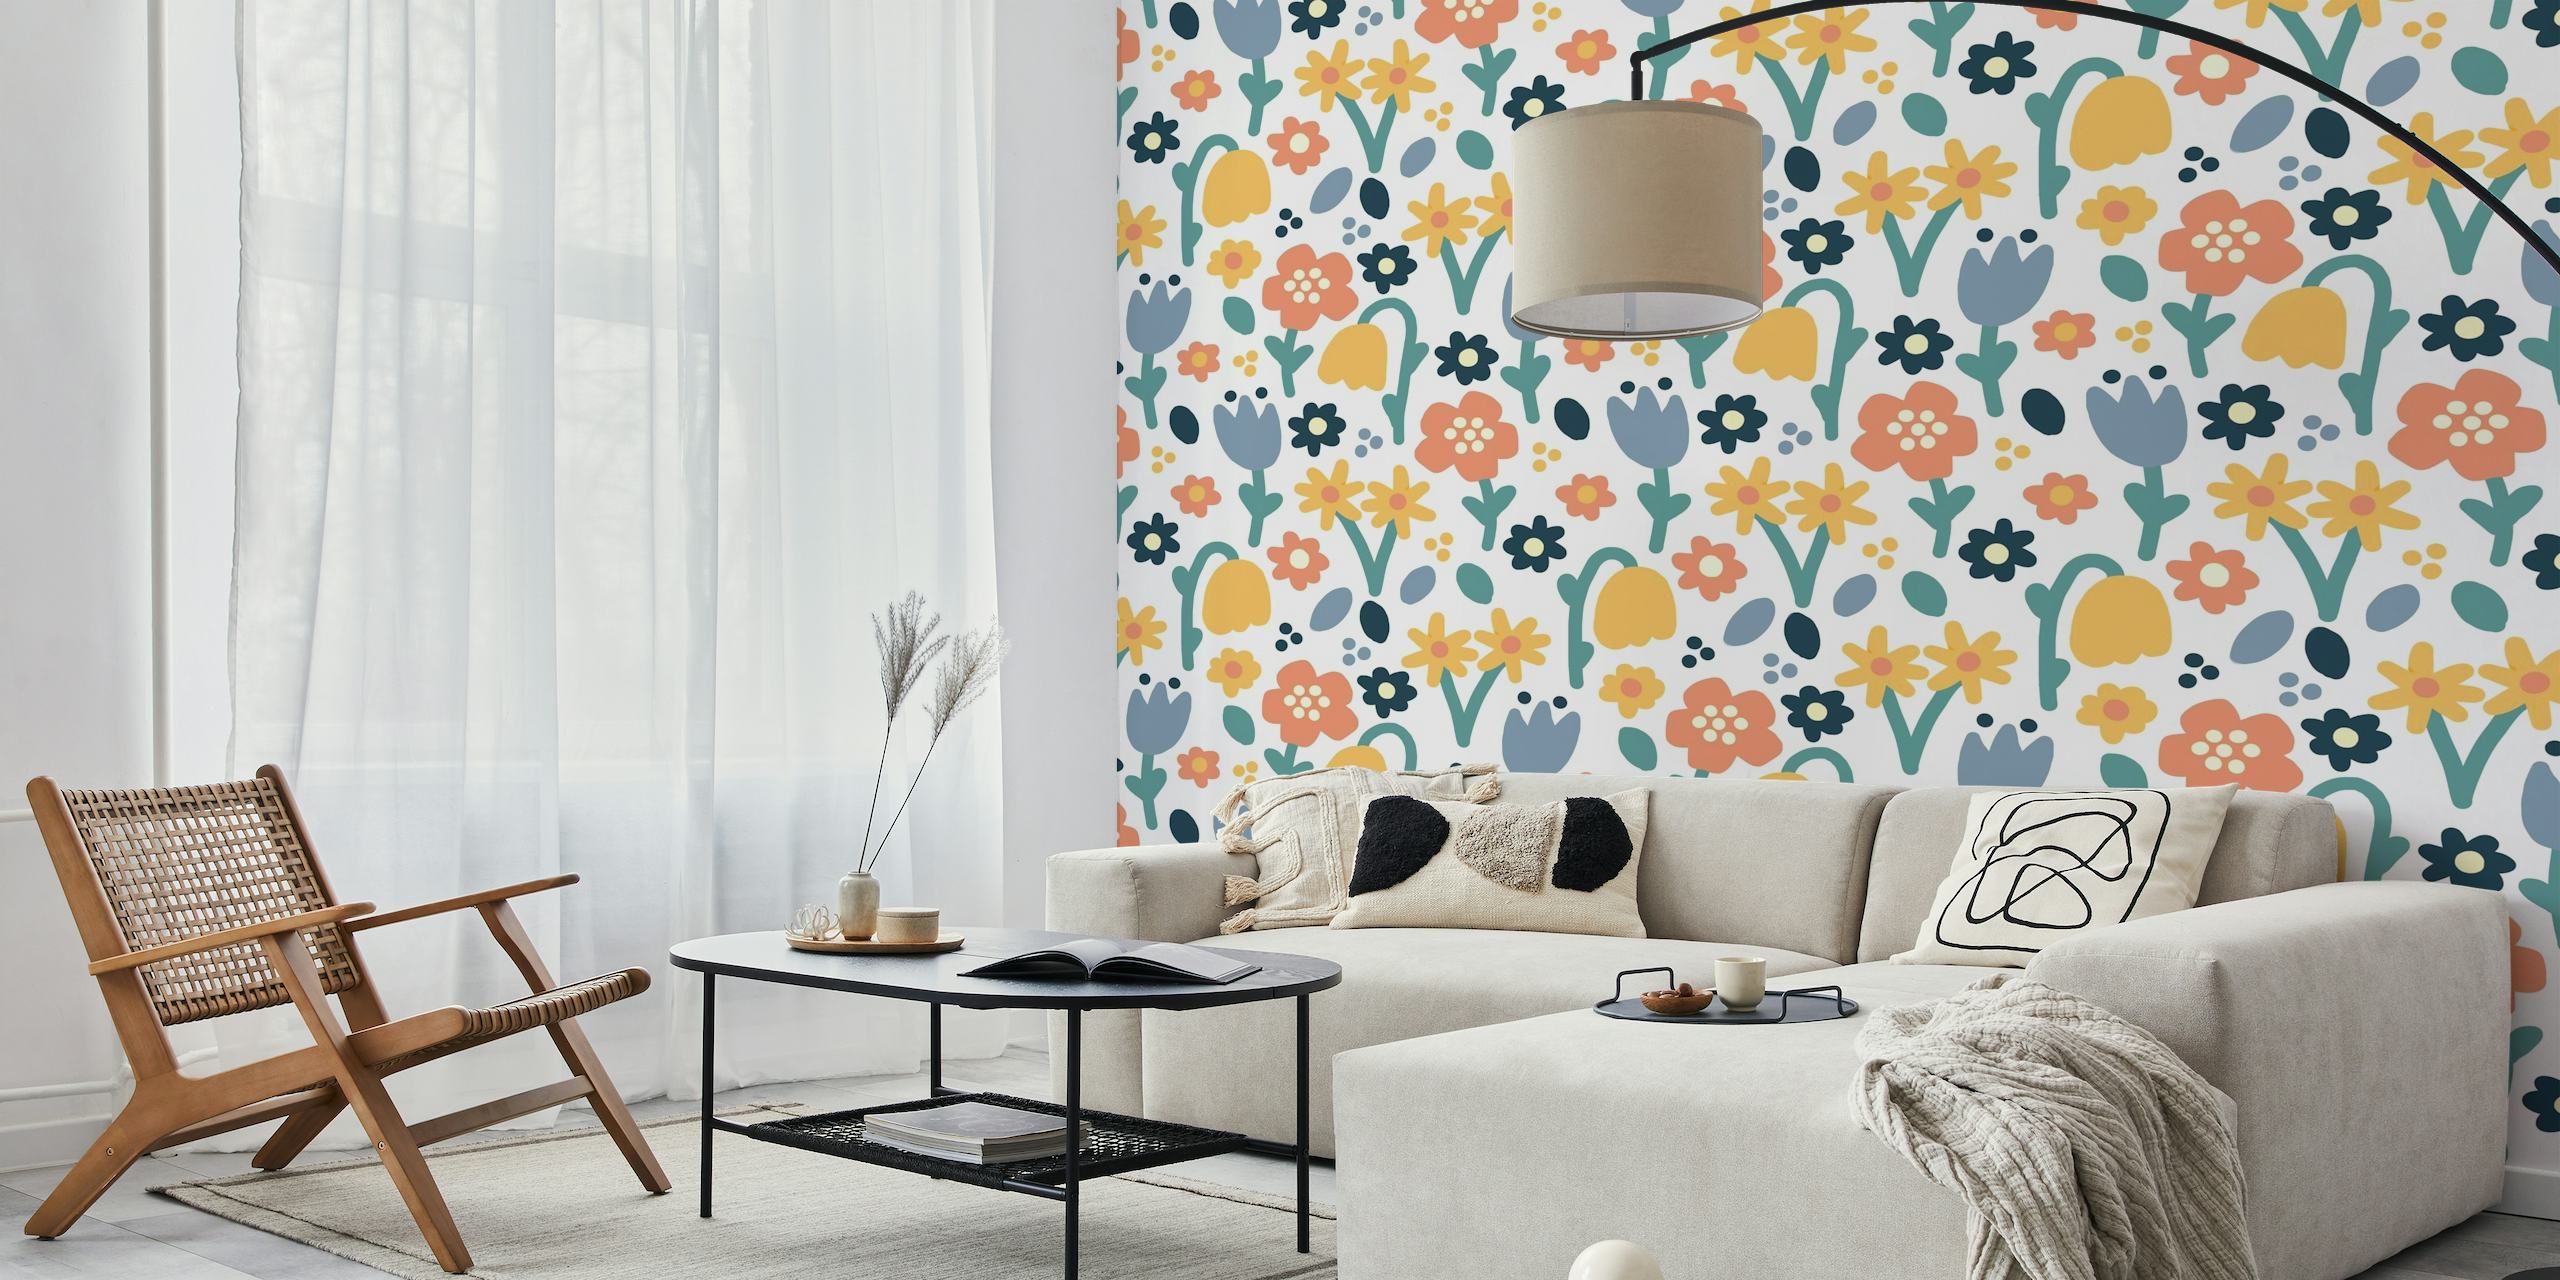 Hand-drawn style wall mural with stylized flowers and leaves in cheerful colors